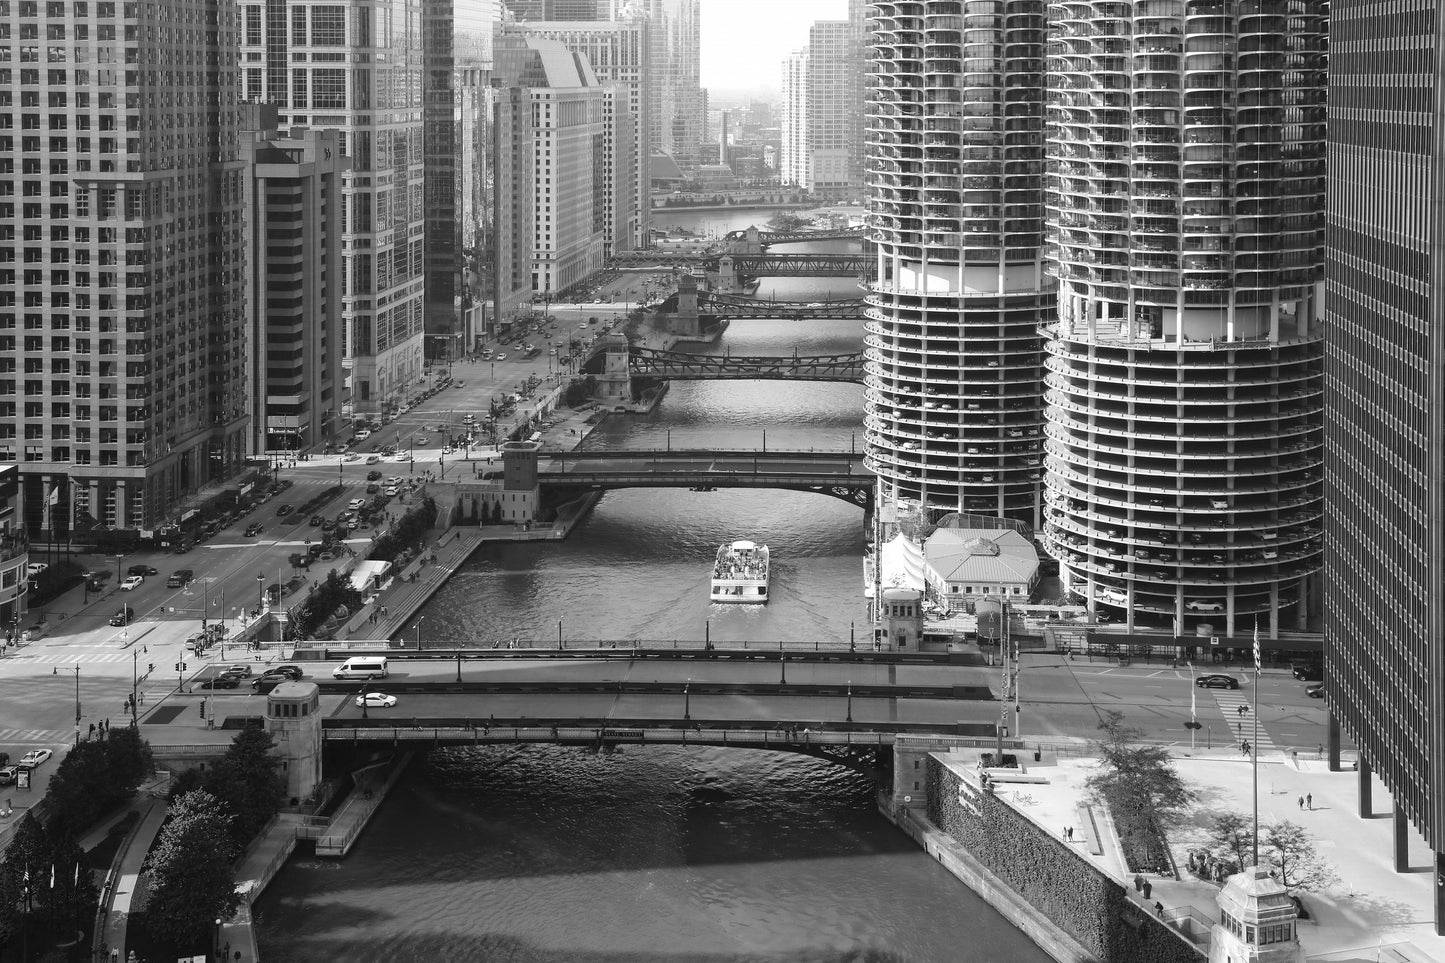 Chicago River wall art, Chicago photo, bridges and boat, city photography, large Illinois wall art, Chicago wall decor, 5x7 8x10 24x36 40x60